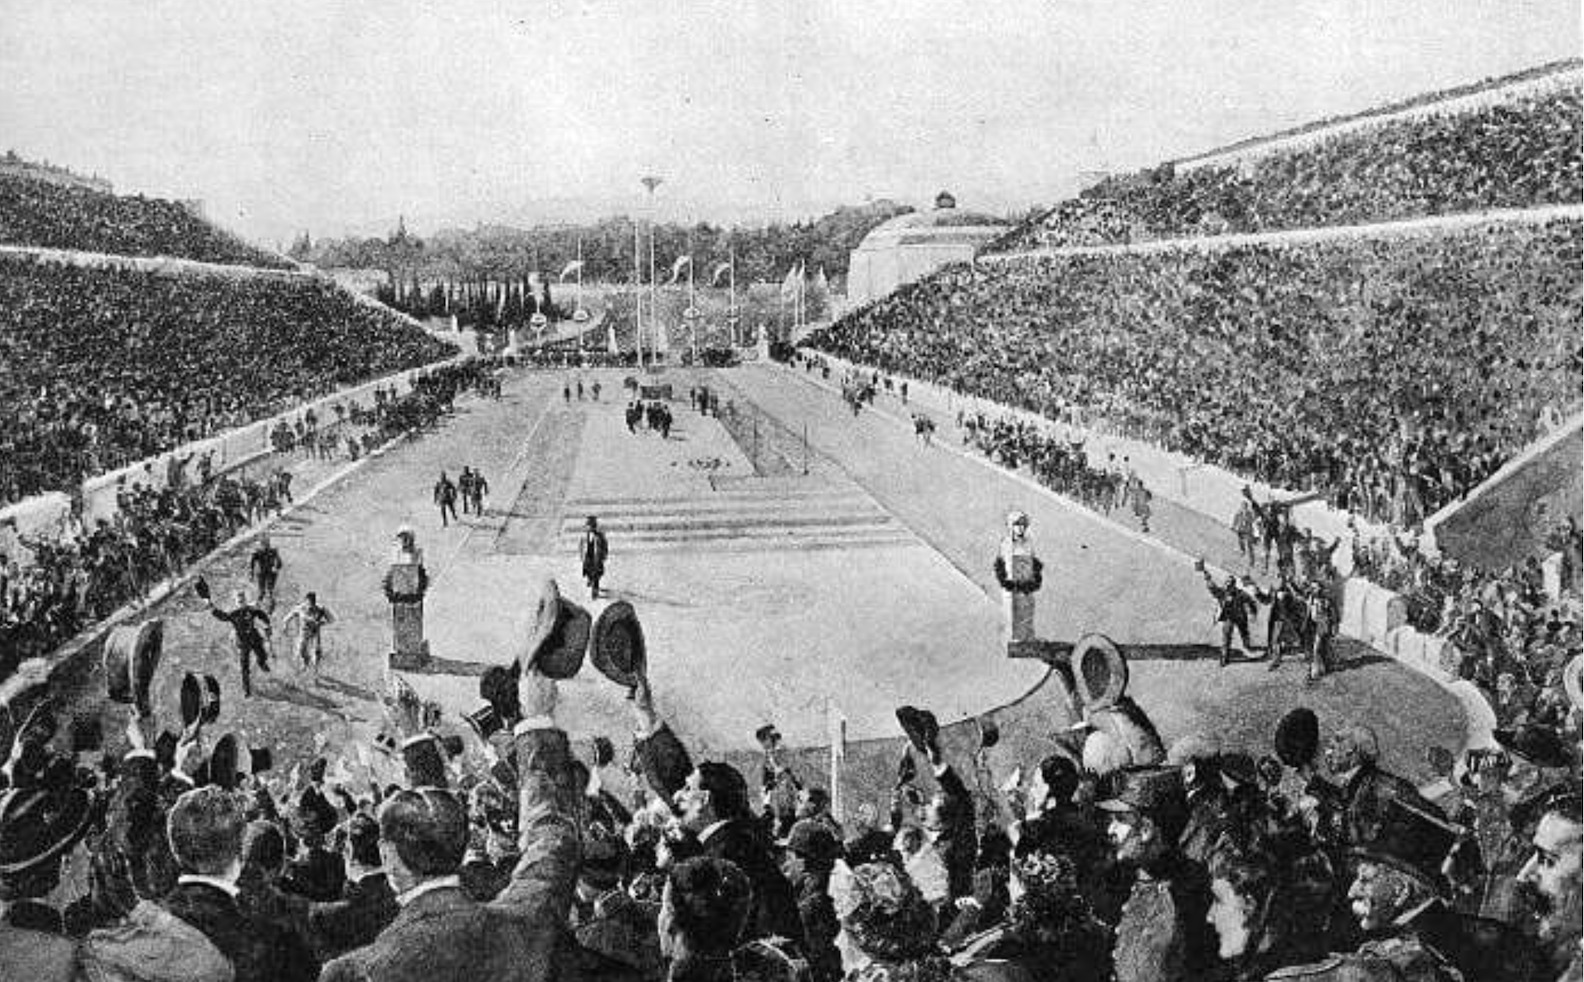 The first-ever Olympics marathon took place on April 10, 1896